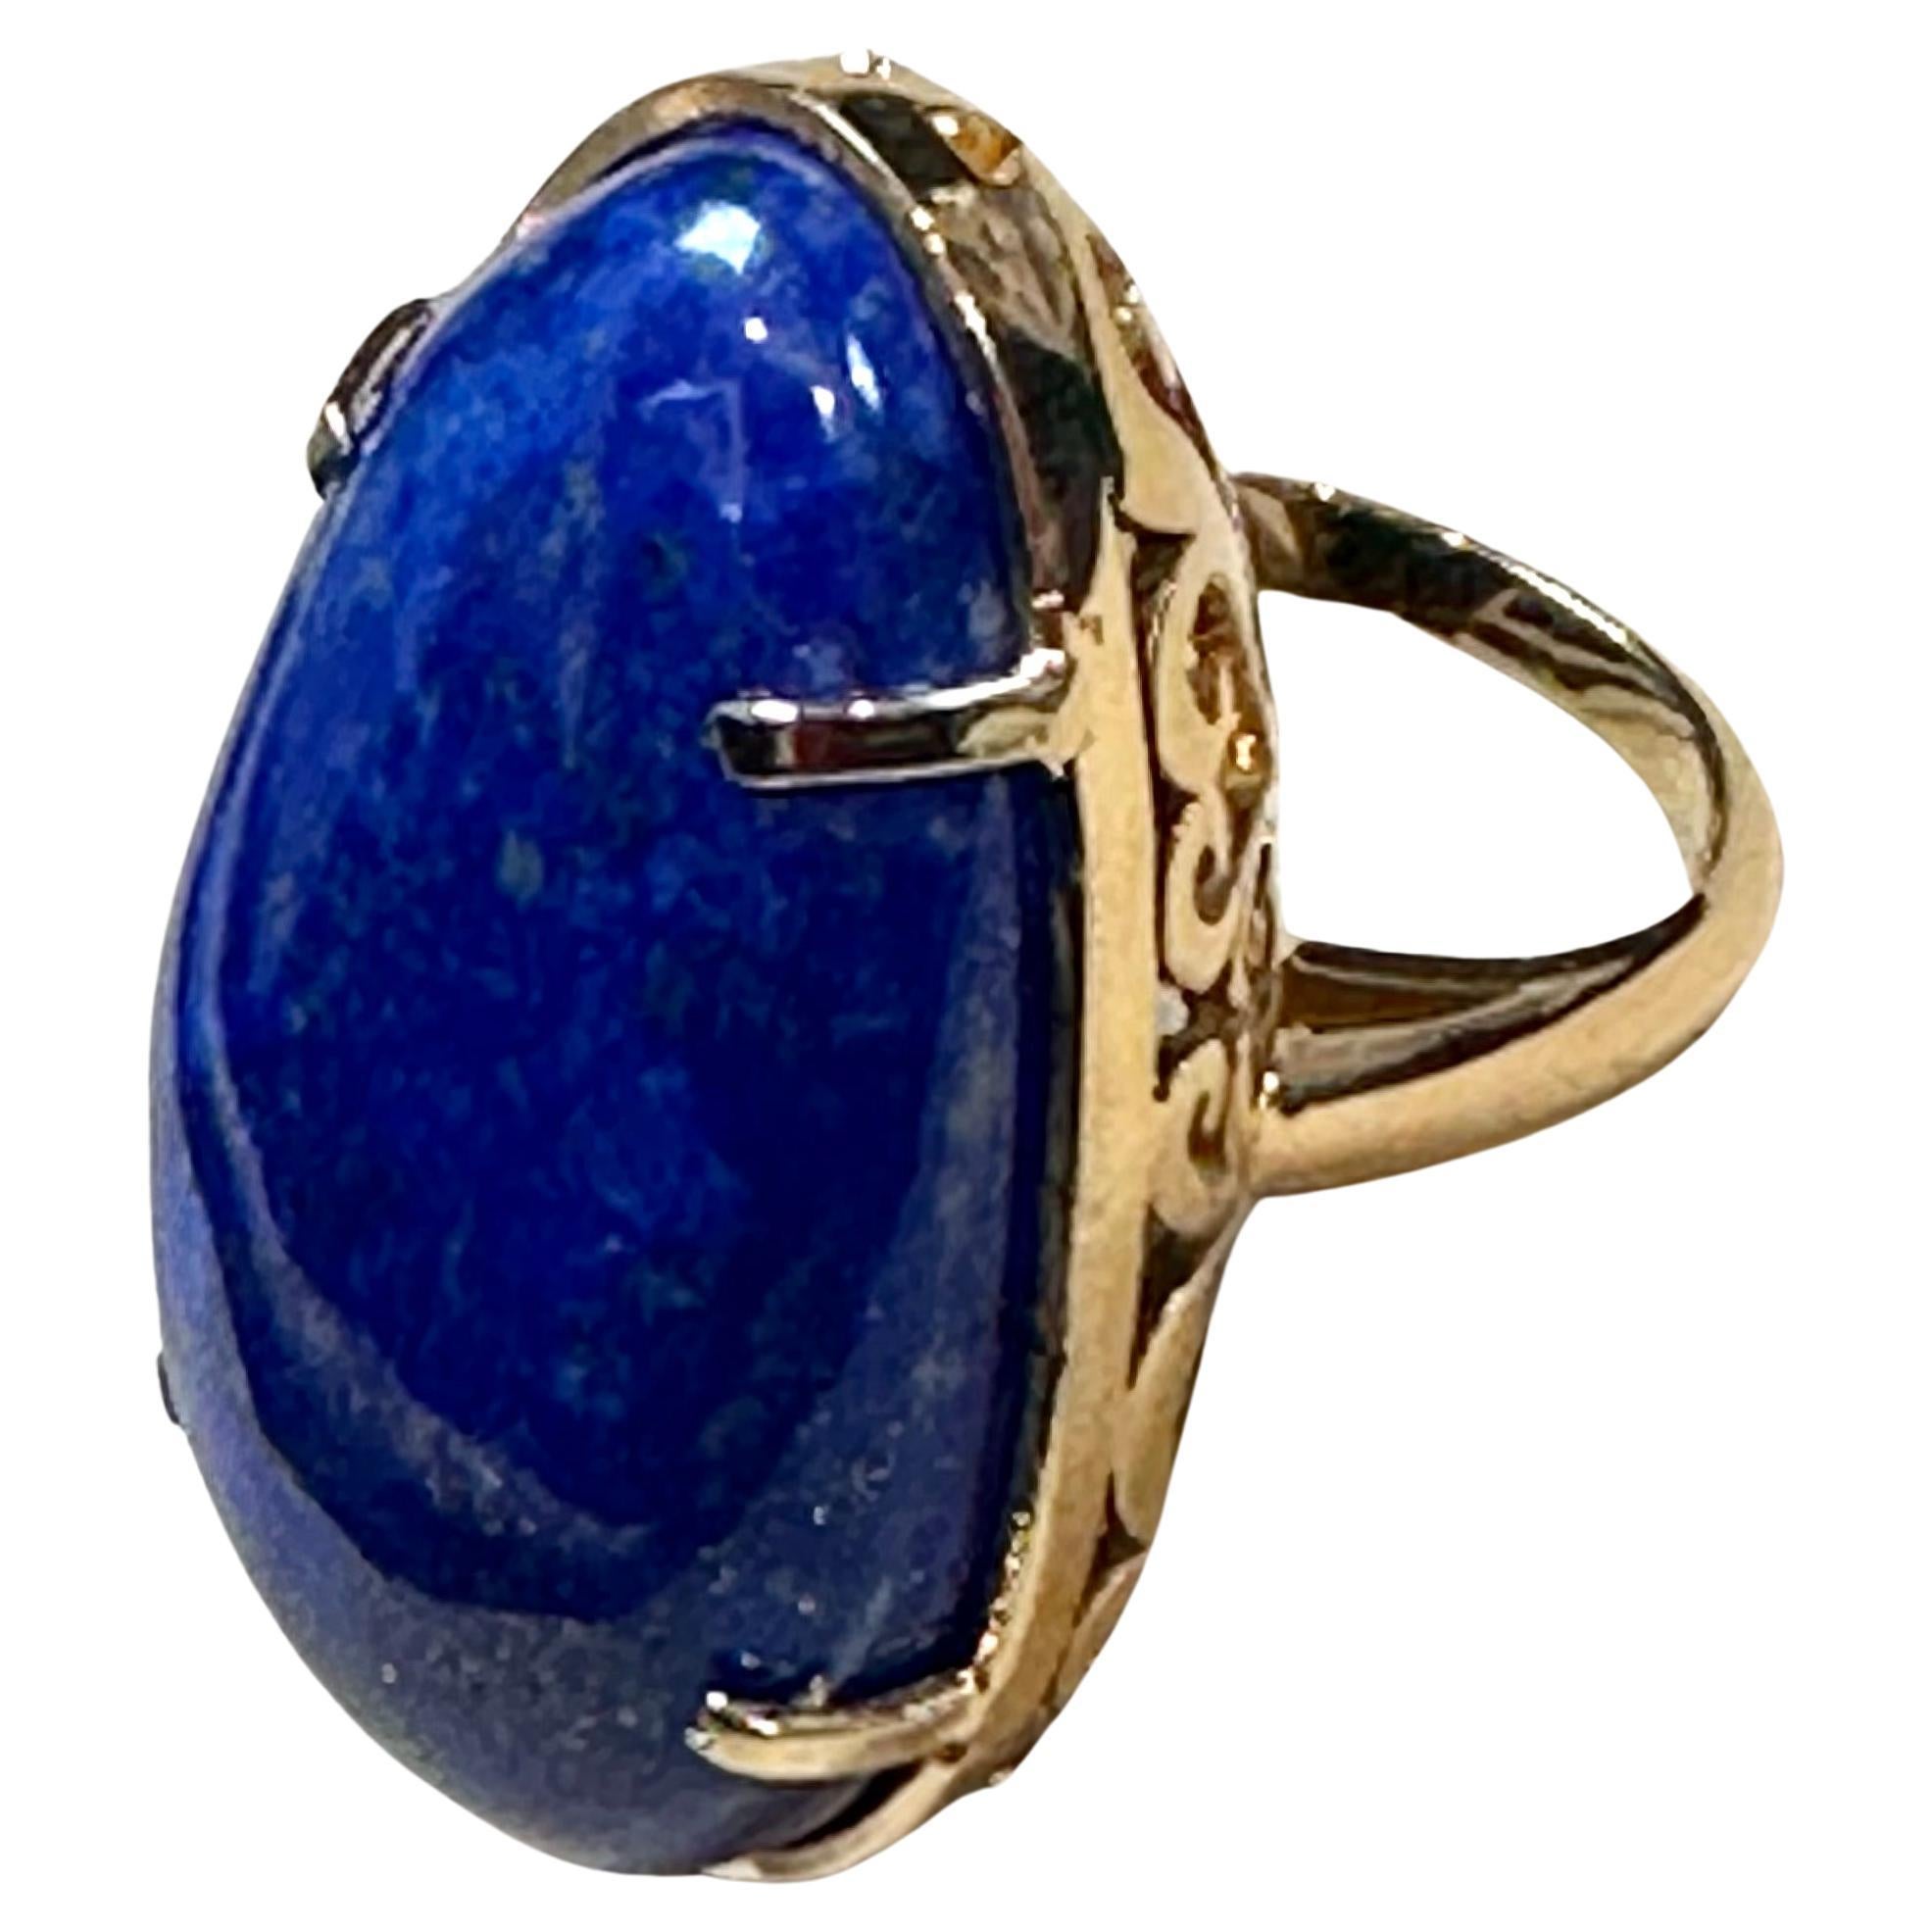 Huge 63 Ct Natural Cabochon Lapis Lazuli Ring in 14 Kt Yellow Gold, Estate For Sale